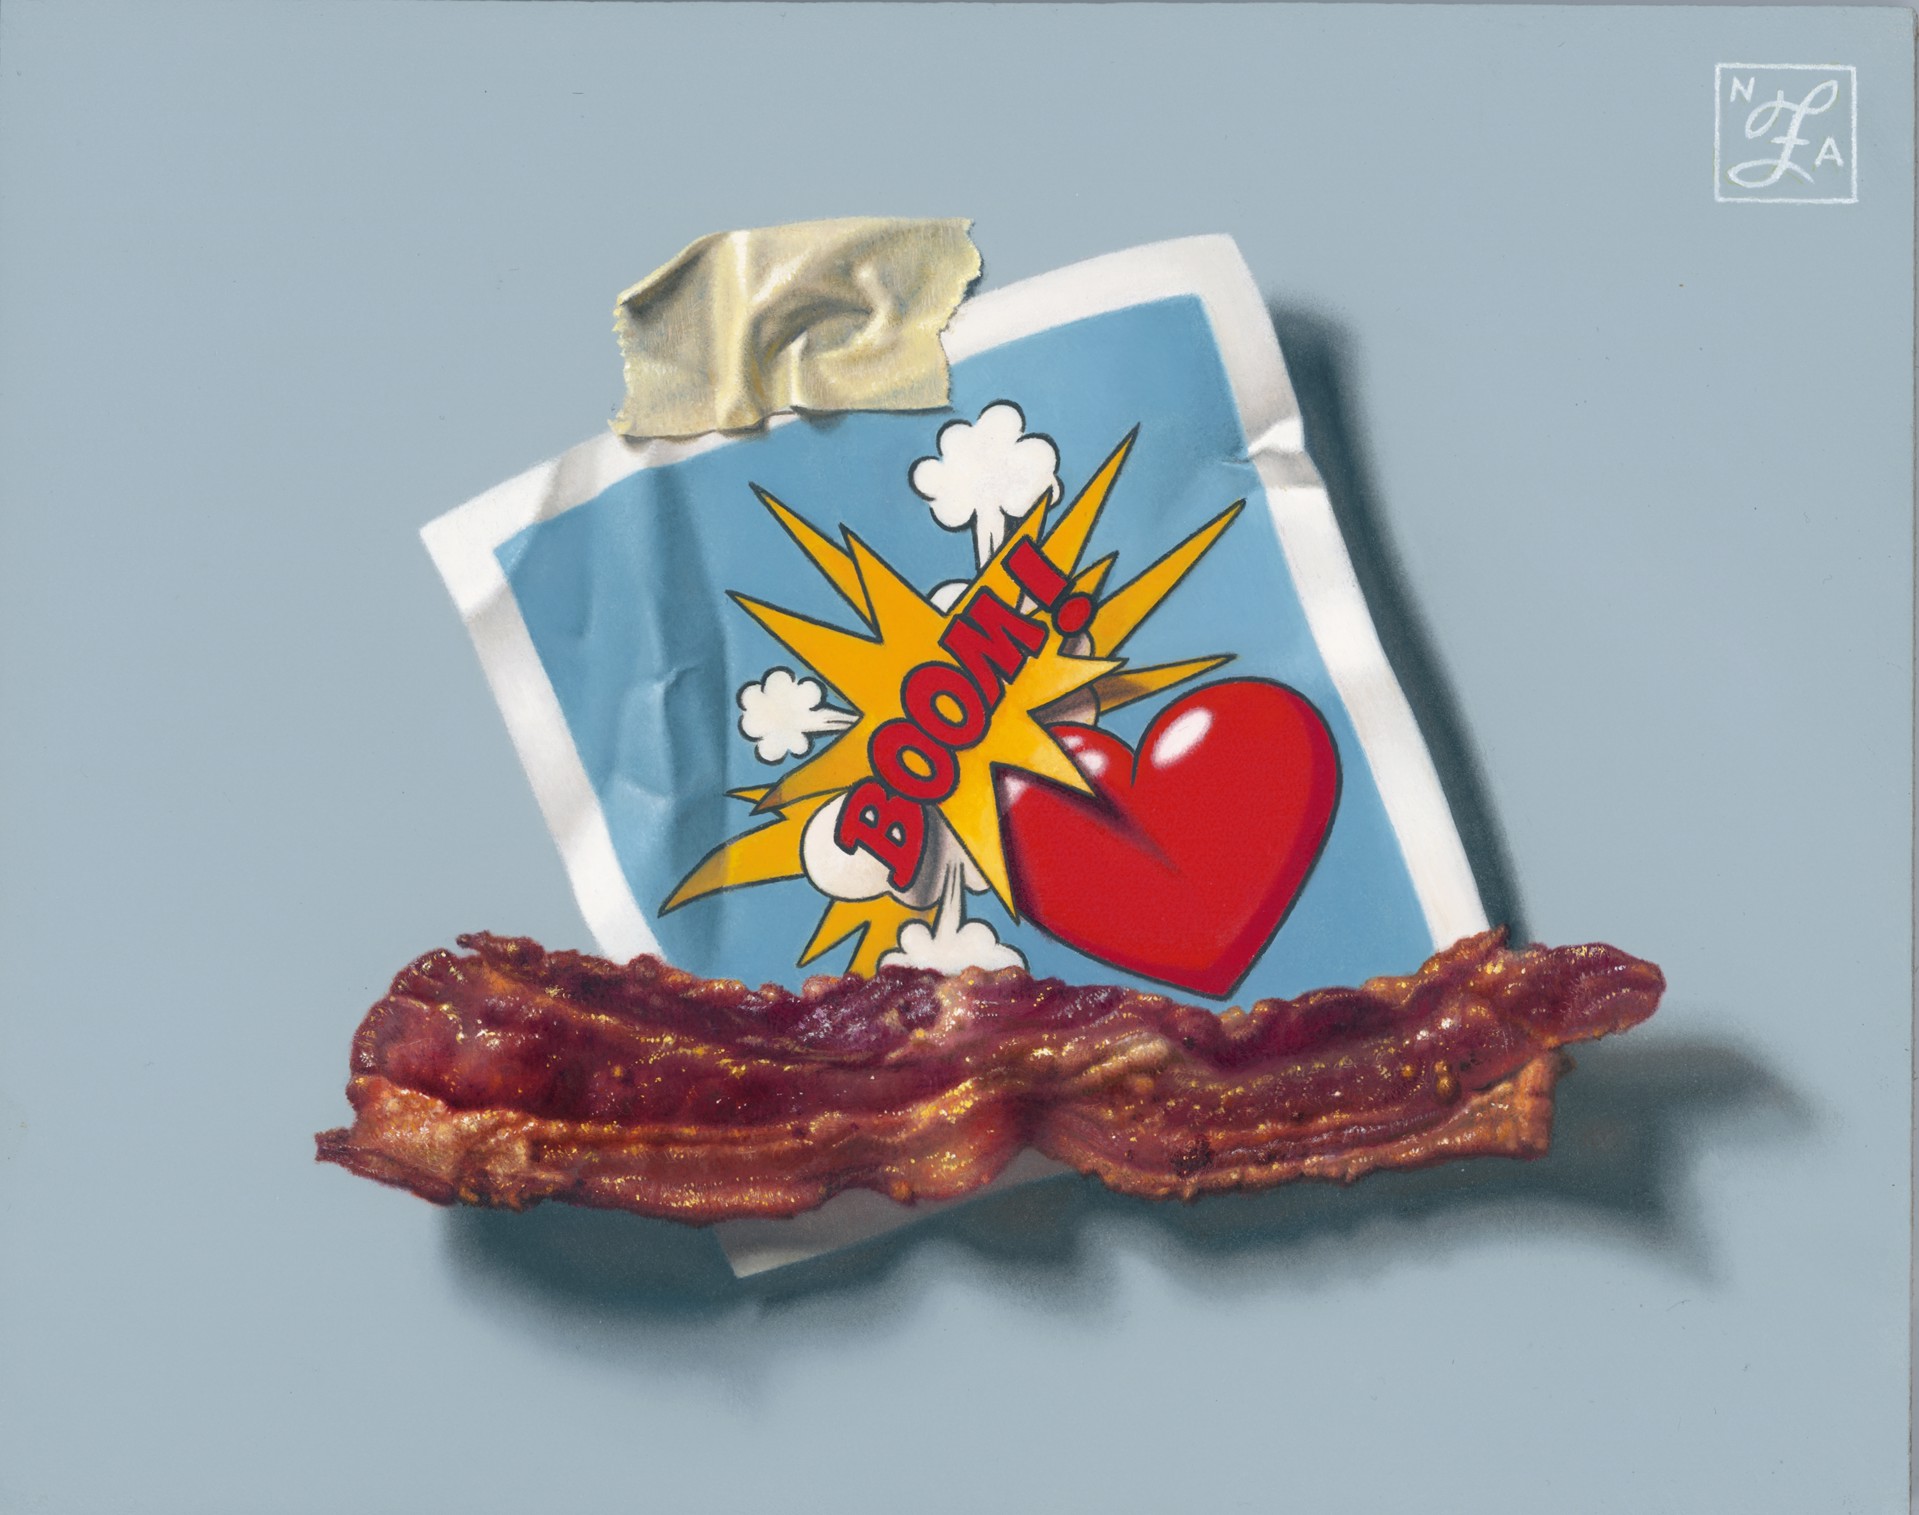 Bacon Lover by Natalie Featherston